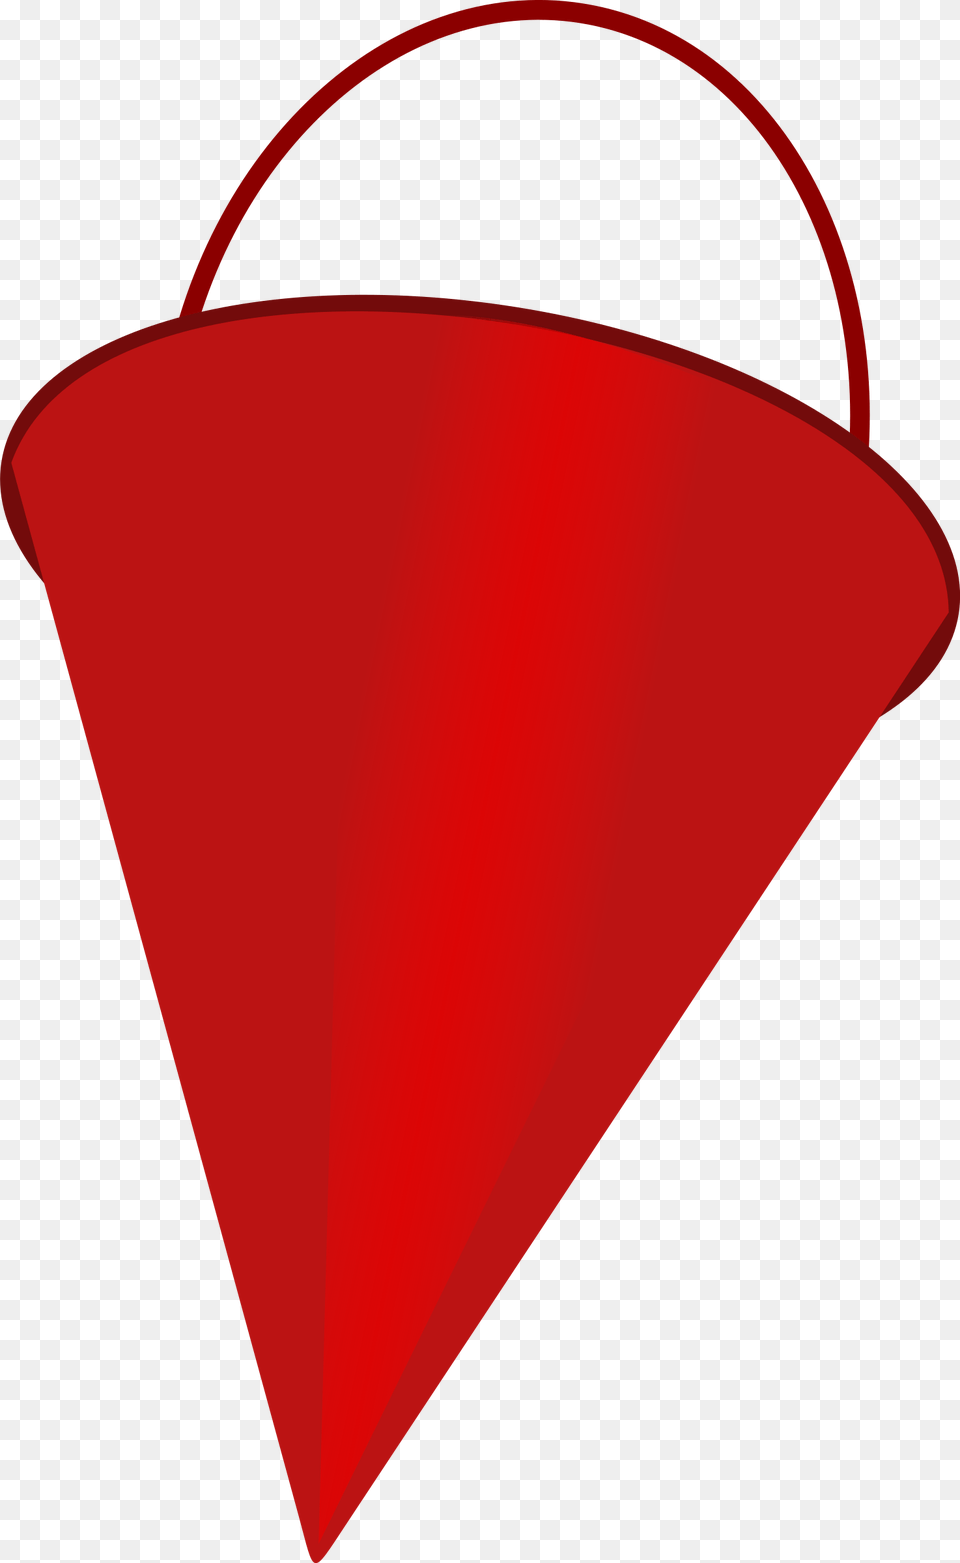 Hearttrianglered Bucket, Cone, Mailbox Png Image